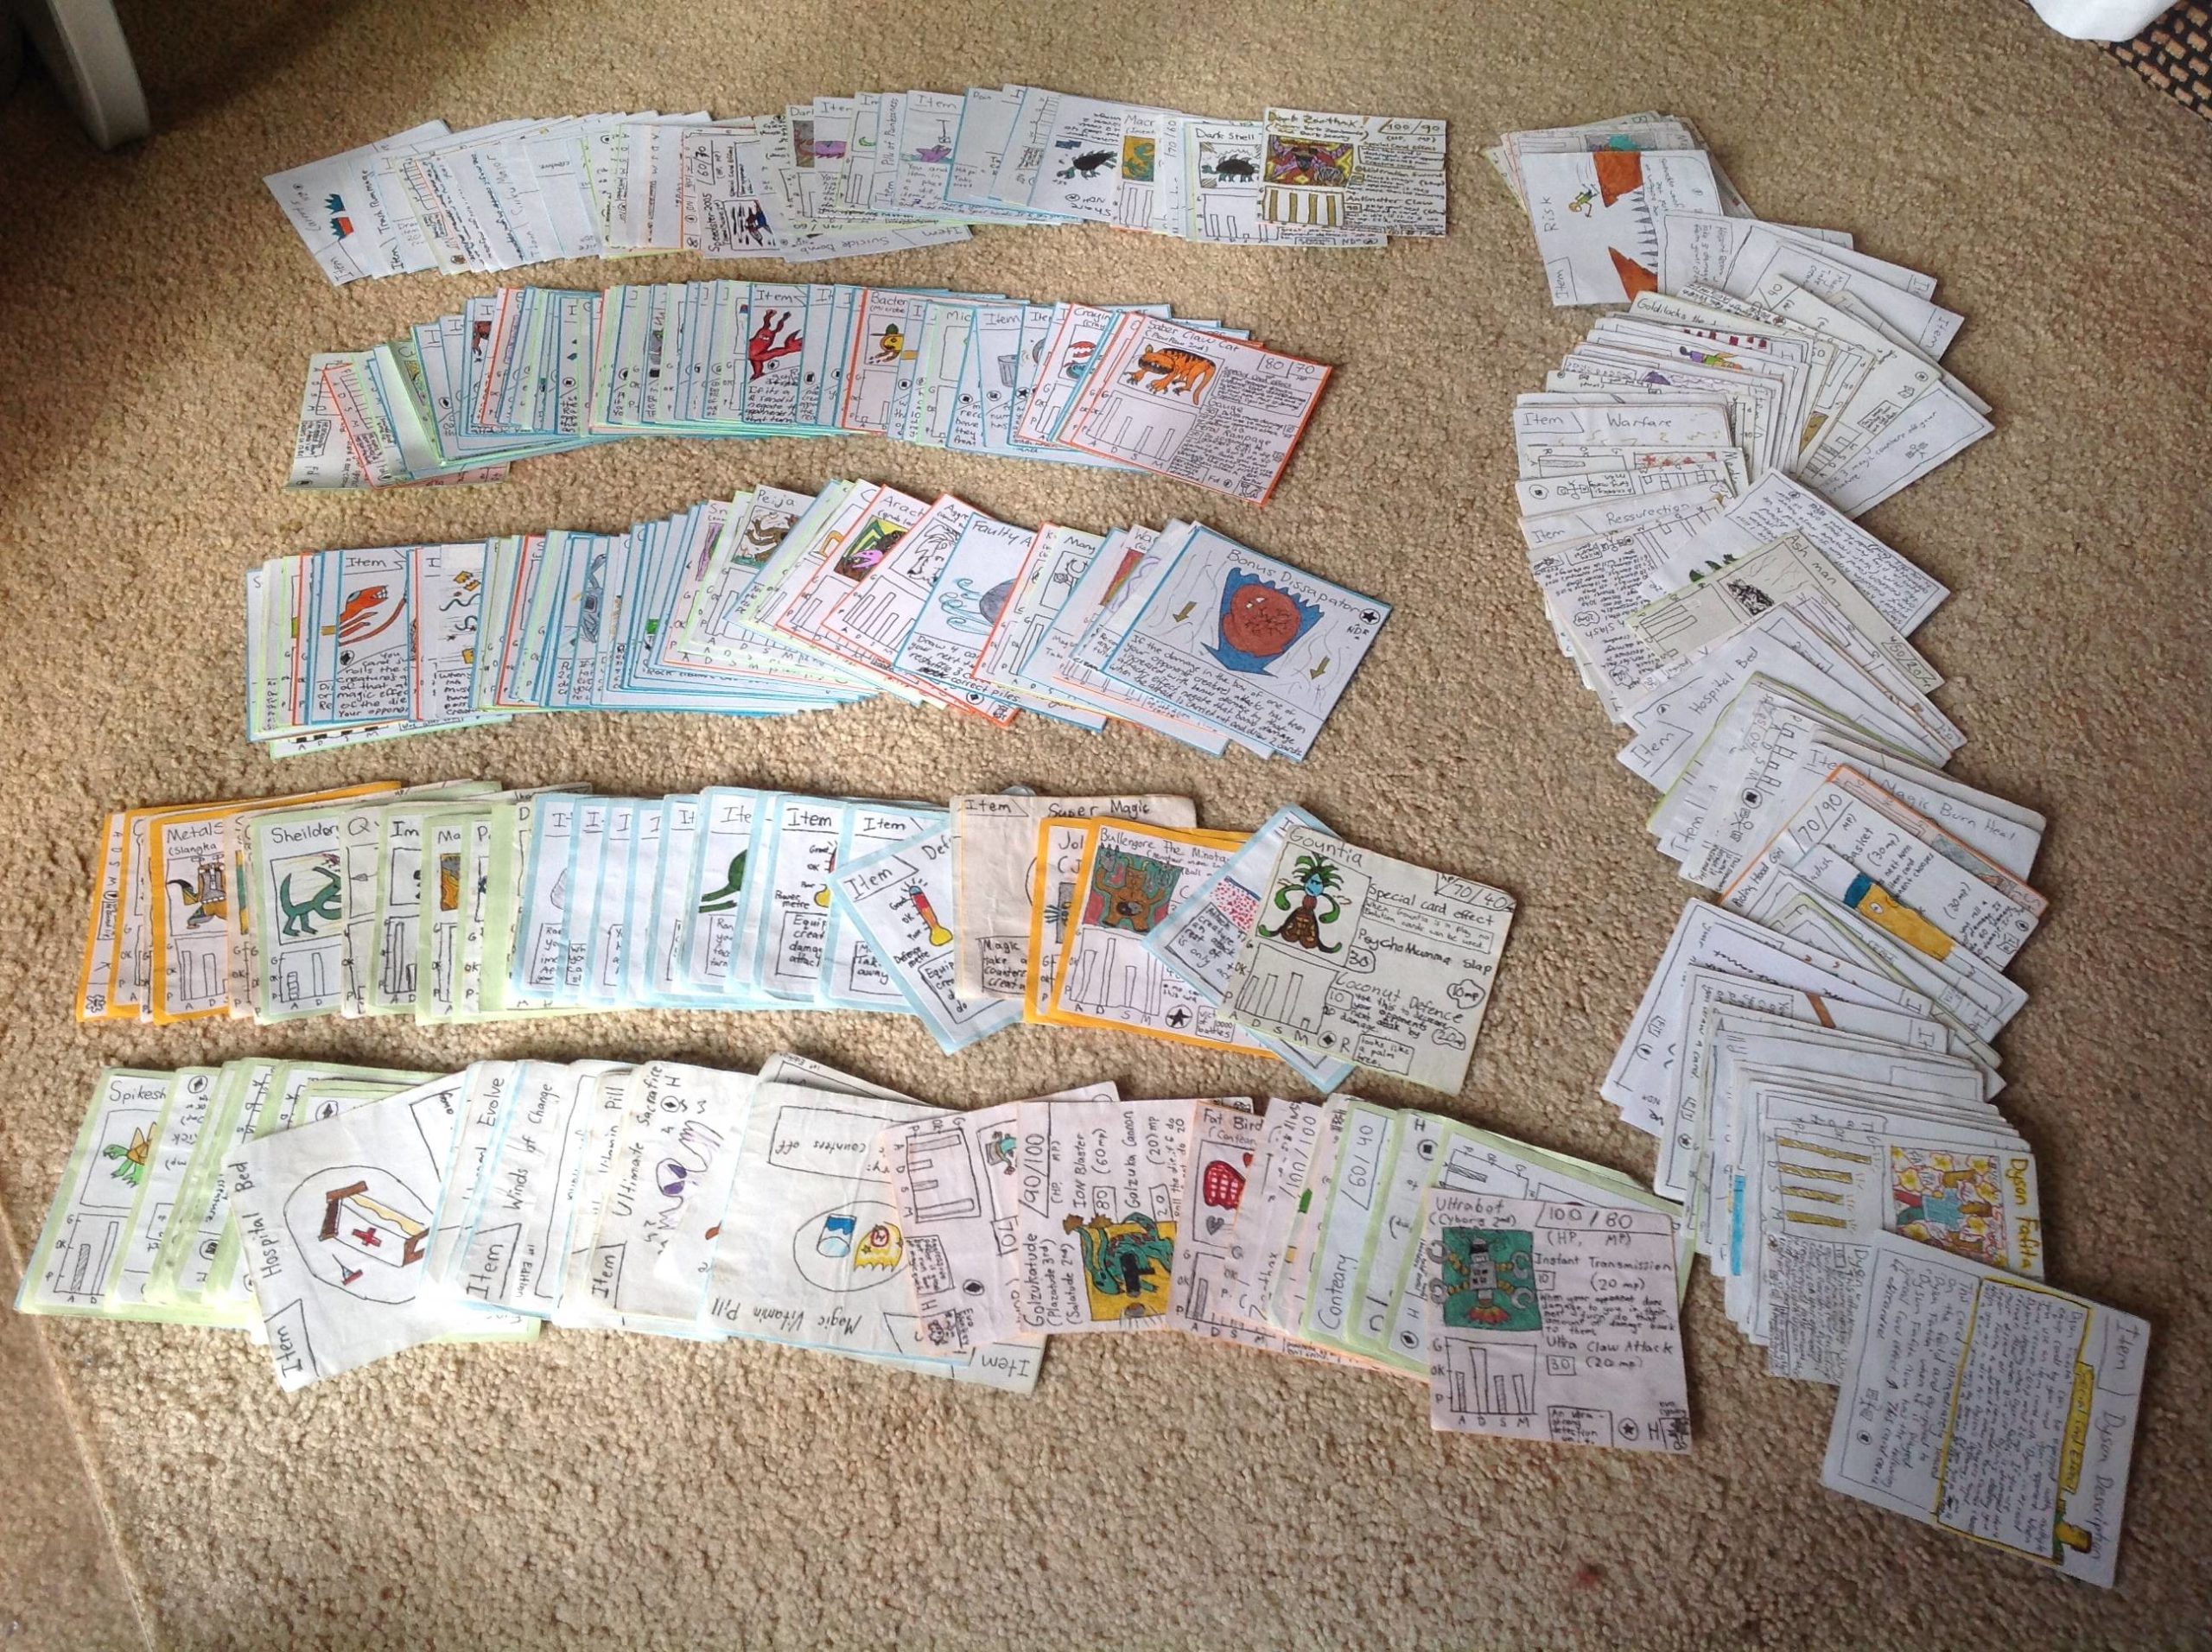 Brothers Couldn’t Afford Pokemon Cards, So They Made Their Own Game